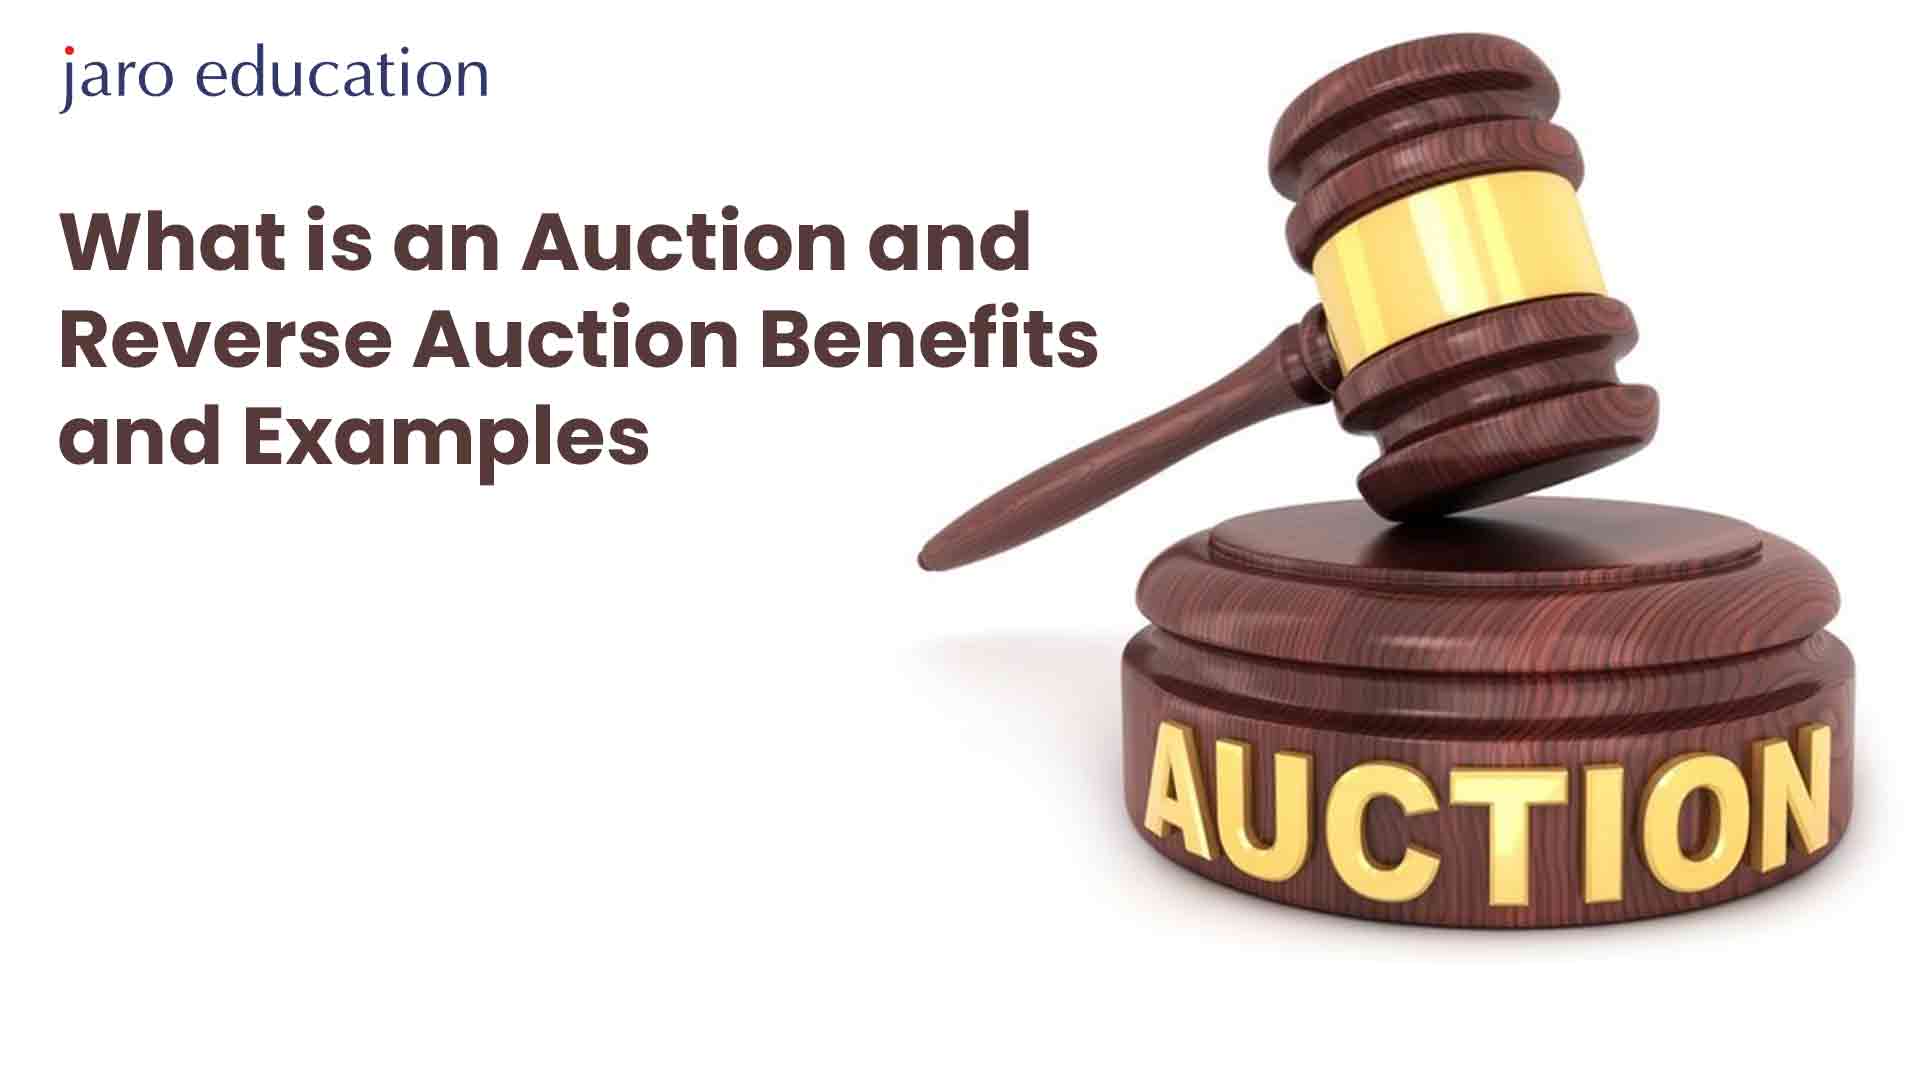 What is an Auction and Reverse Auction Benefits and Examples